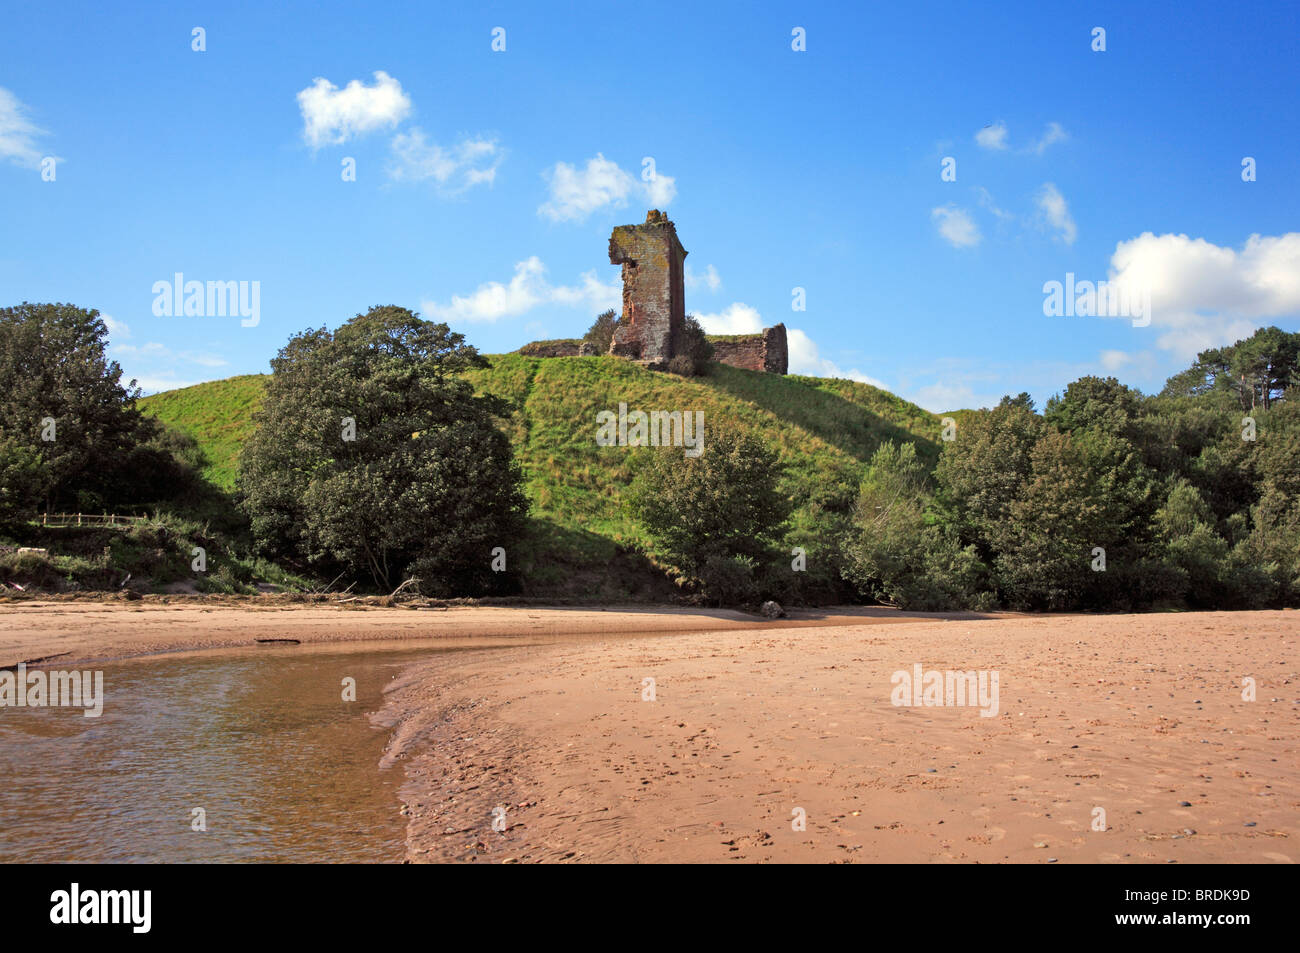 Lunan Water and the ruins of the Red Castle at Lunan Bay, Angus, Scotland, United Kingdom. Stock Photo